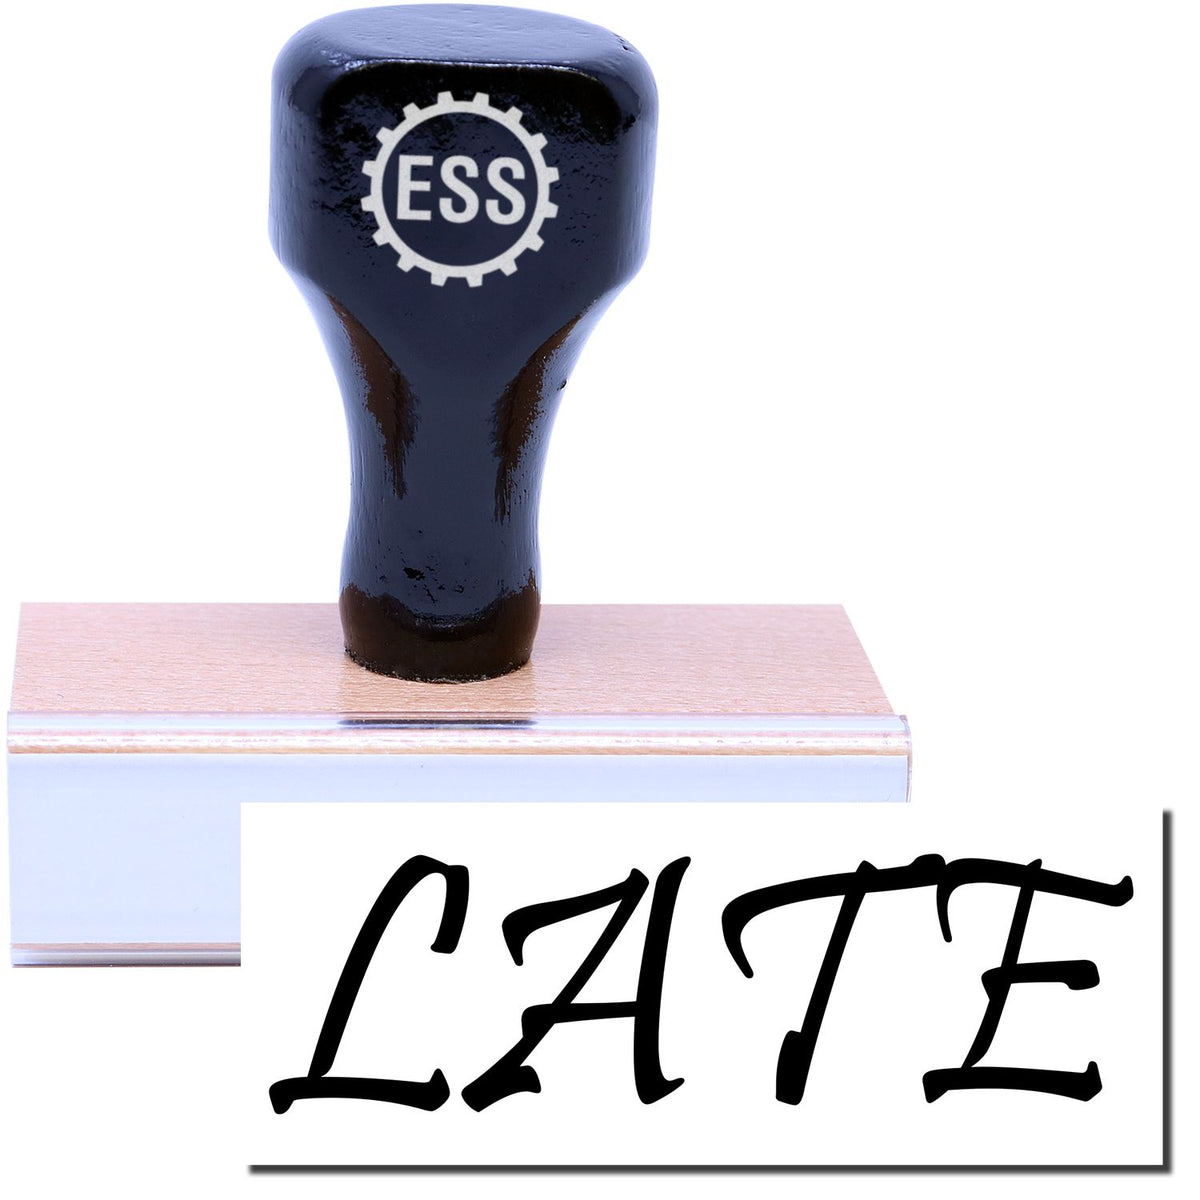 A stock office rubber stamp with a stamped image showing how the text &quot;LATE&quot; in a large font is displayed after stamping.